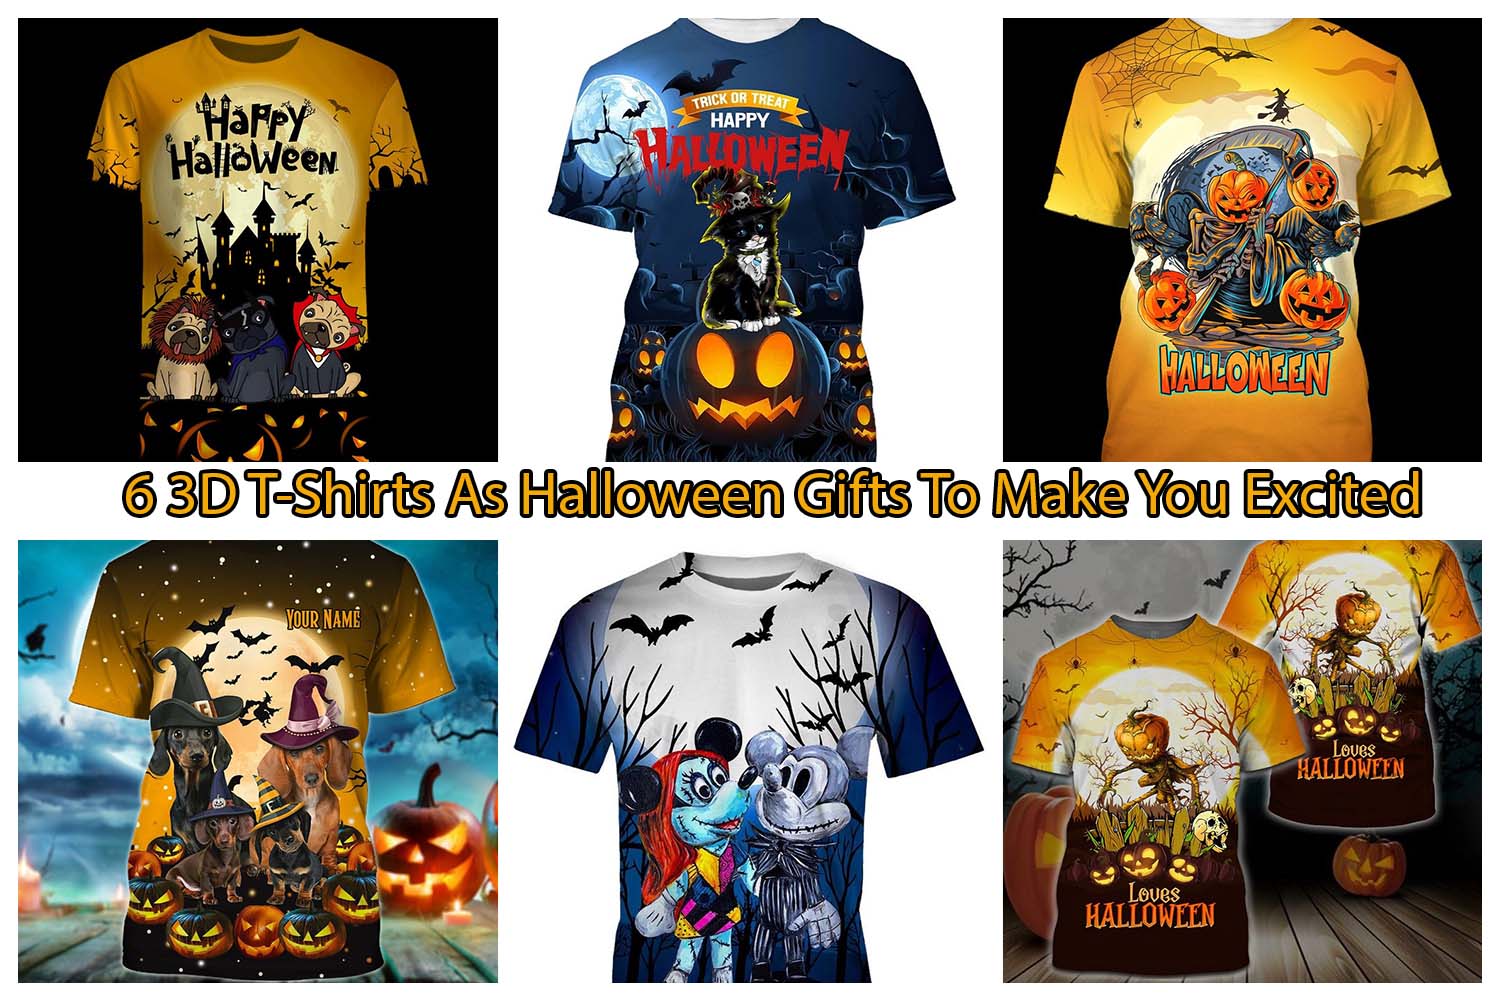 6 3D T-Shirts As Halloween Gifts To Make You Excited